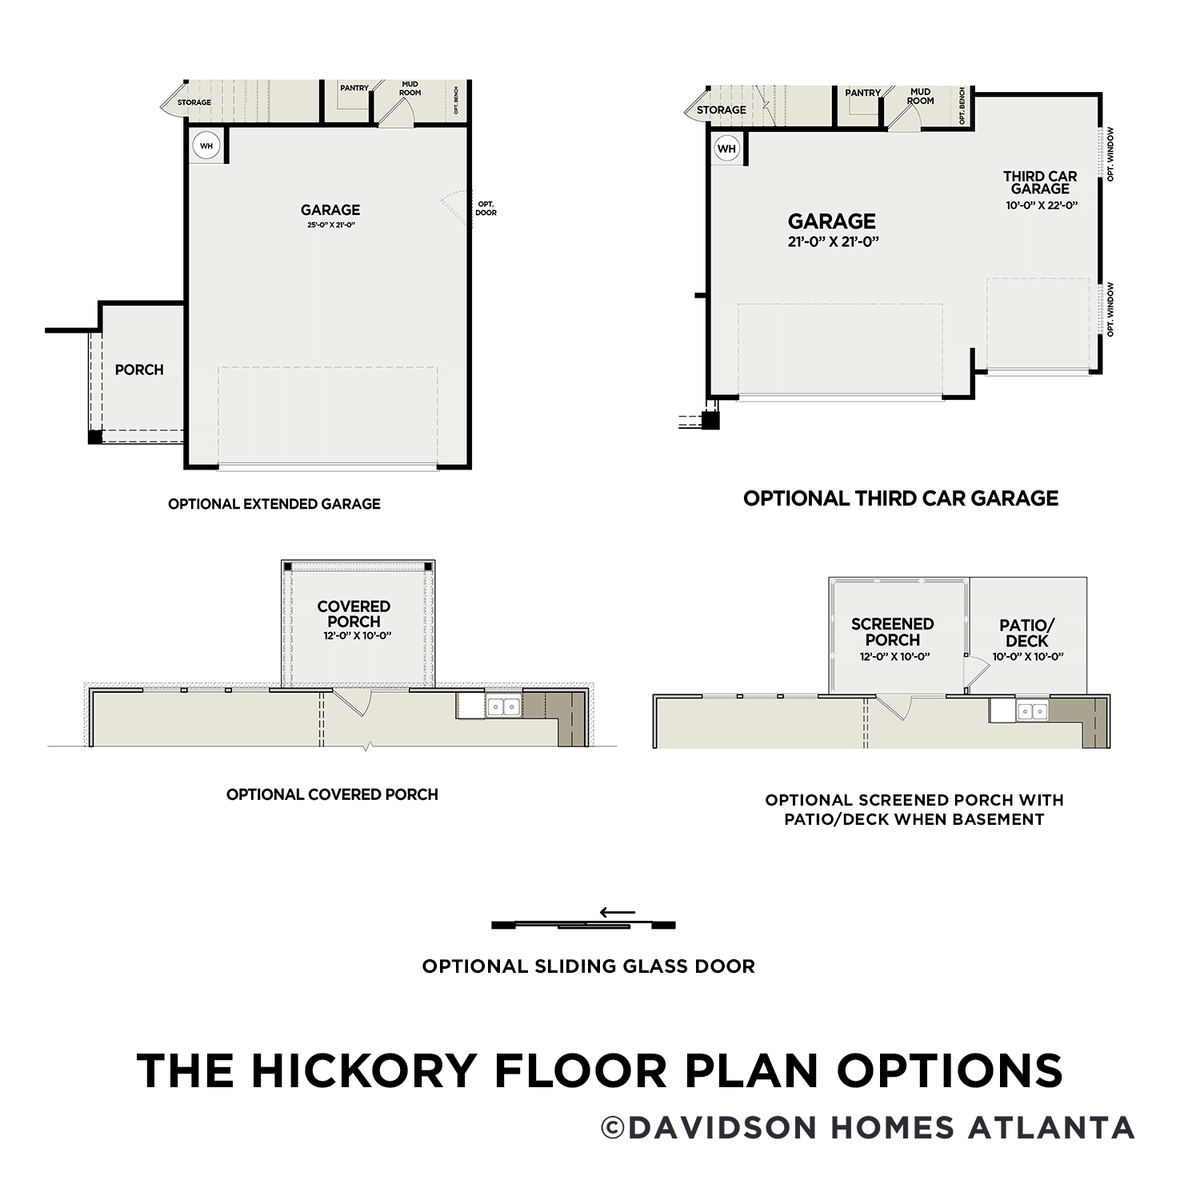 3 - The Hickory B floor plan layout for 14 Knollwood Way in Davidson Homes' Mountainbrook community.